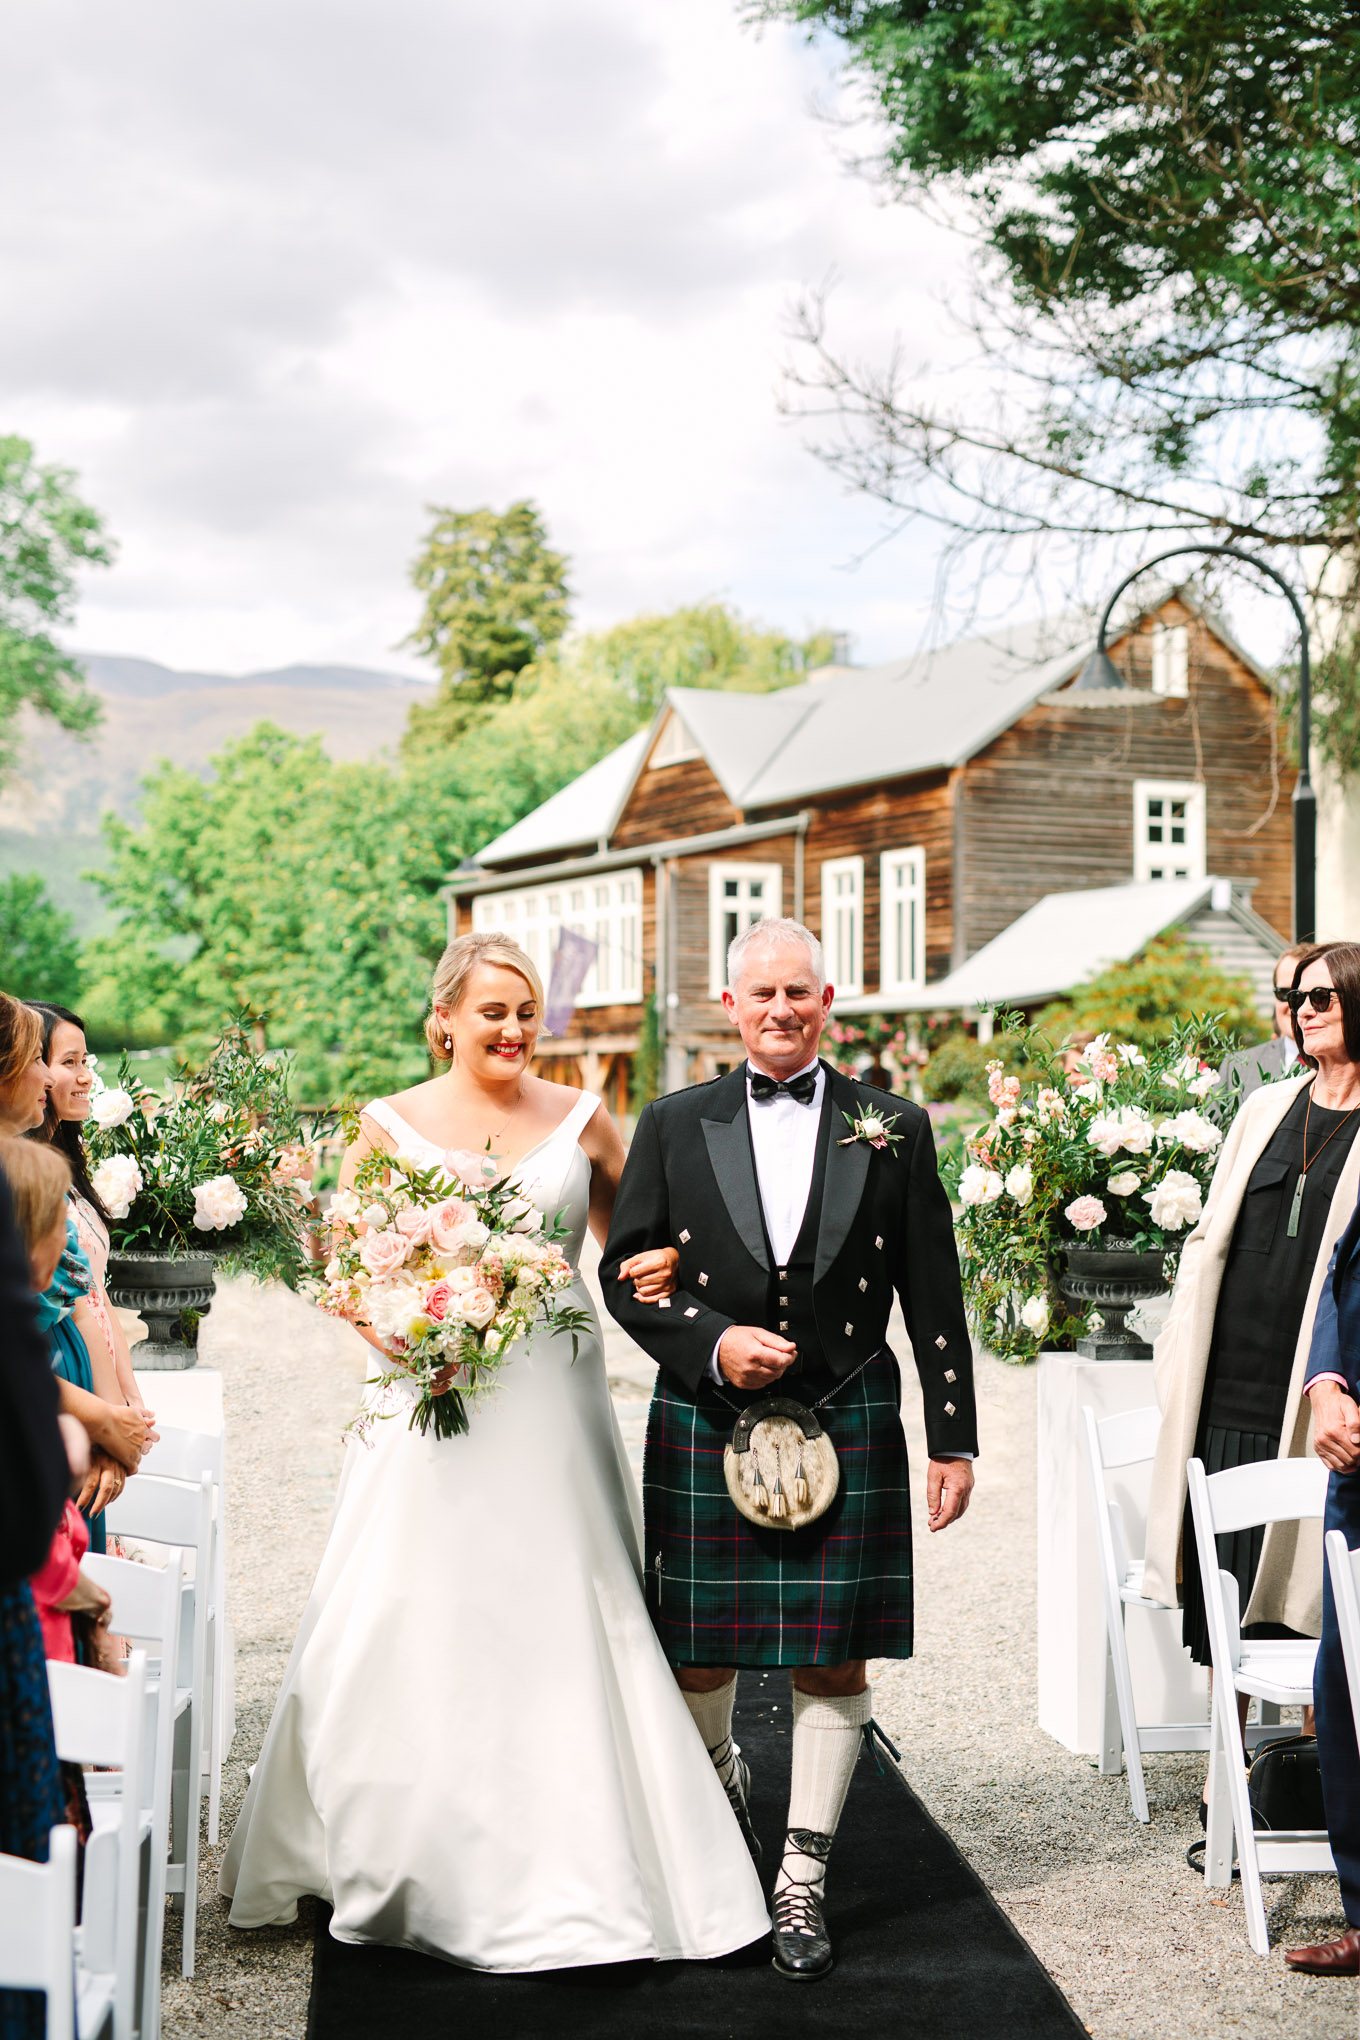 Bride and father in traditional Scottish kilt walking down the aisle at wedding ceremony. Millbrook Resort Queenstown New Zealand wedding by Mary Costa Photography | www.marycostaweddings.com